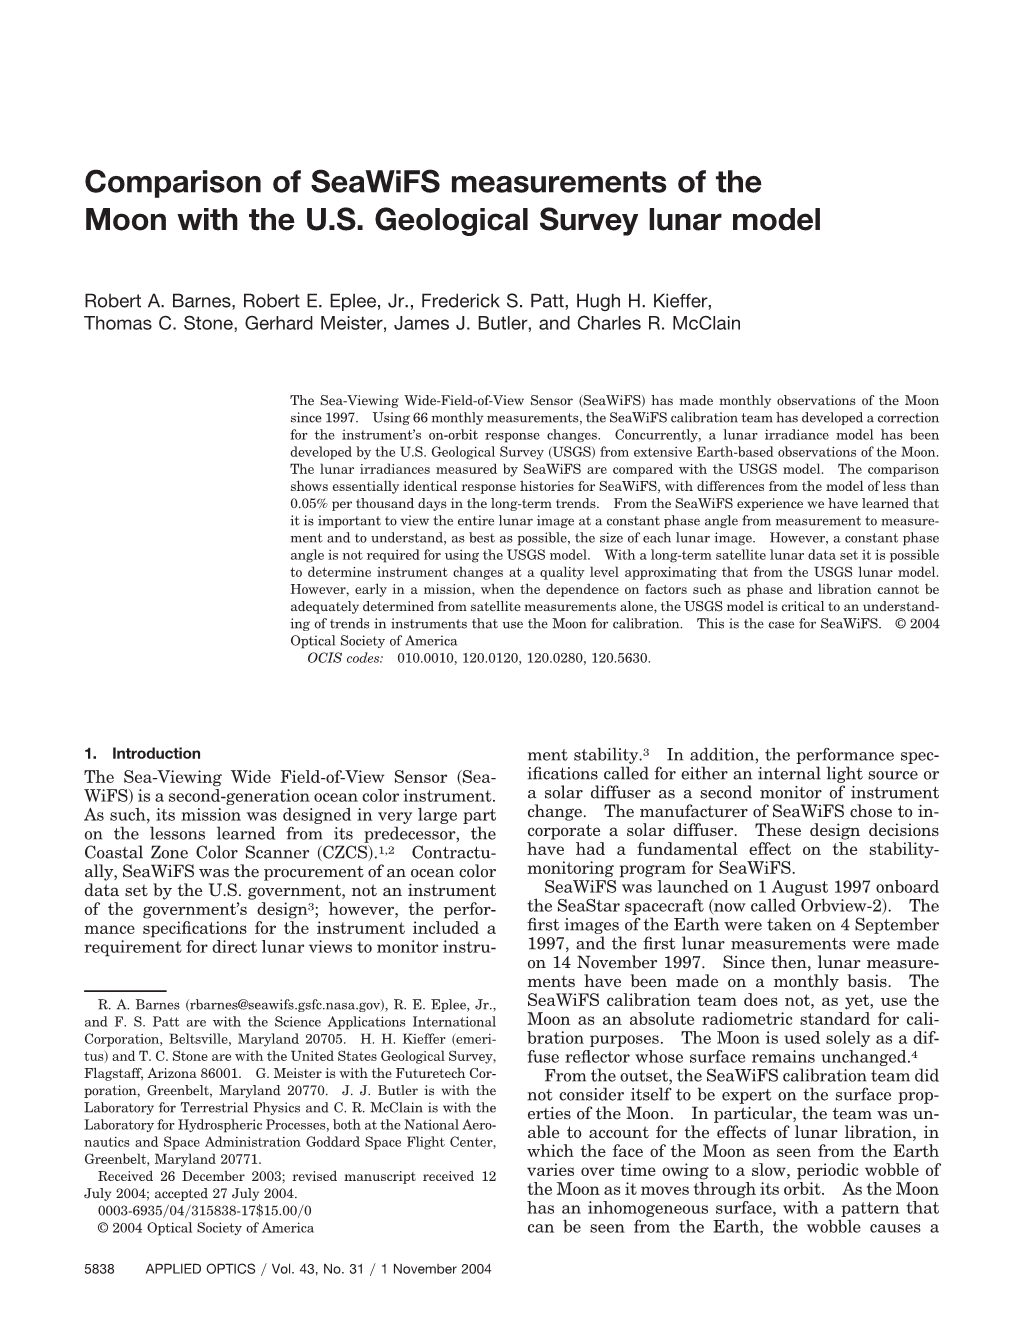 Comparison of Seawifs Measurements of the Moon with the U.S